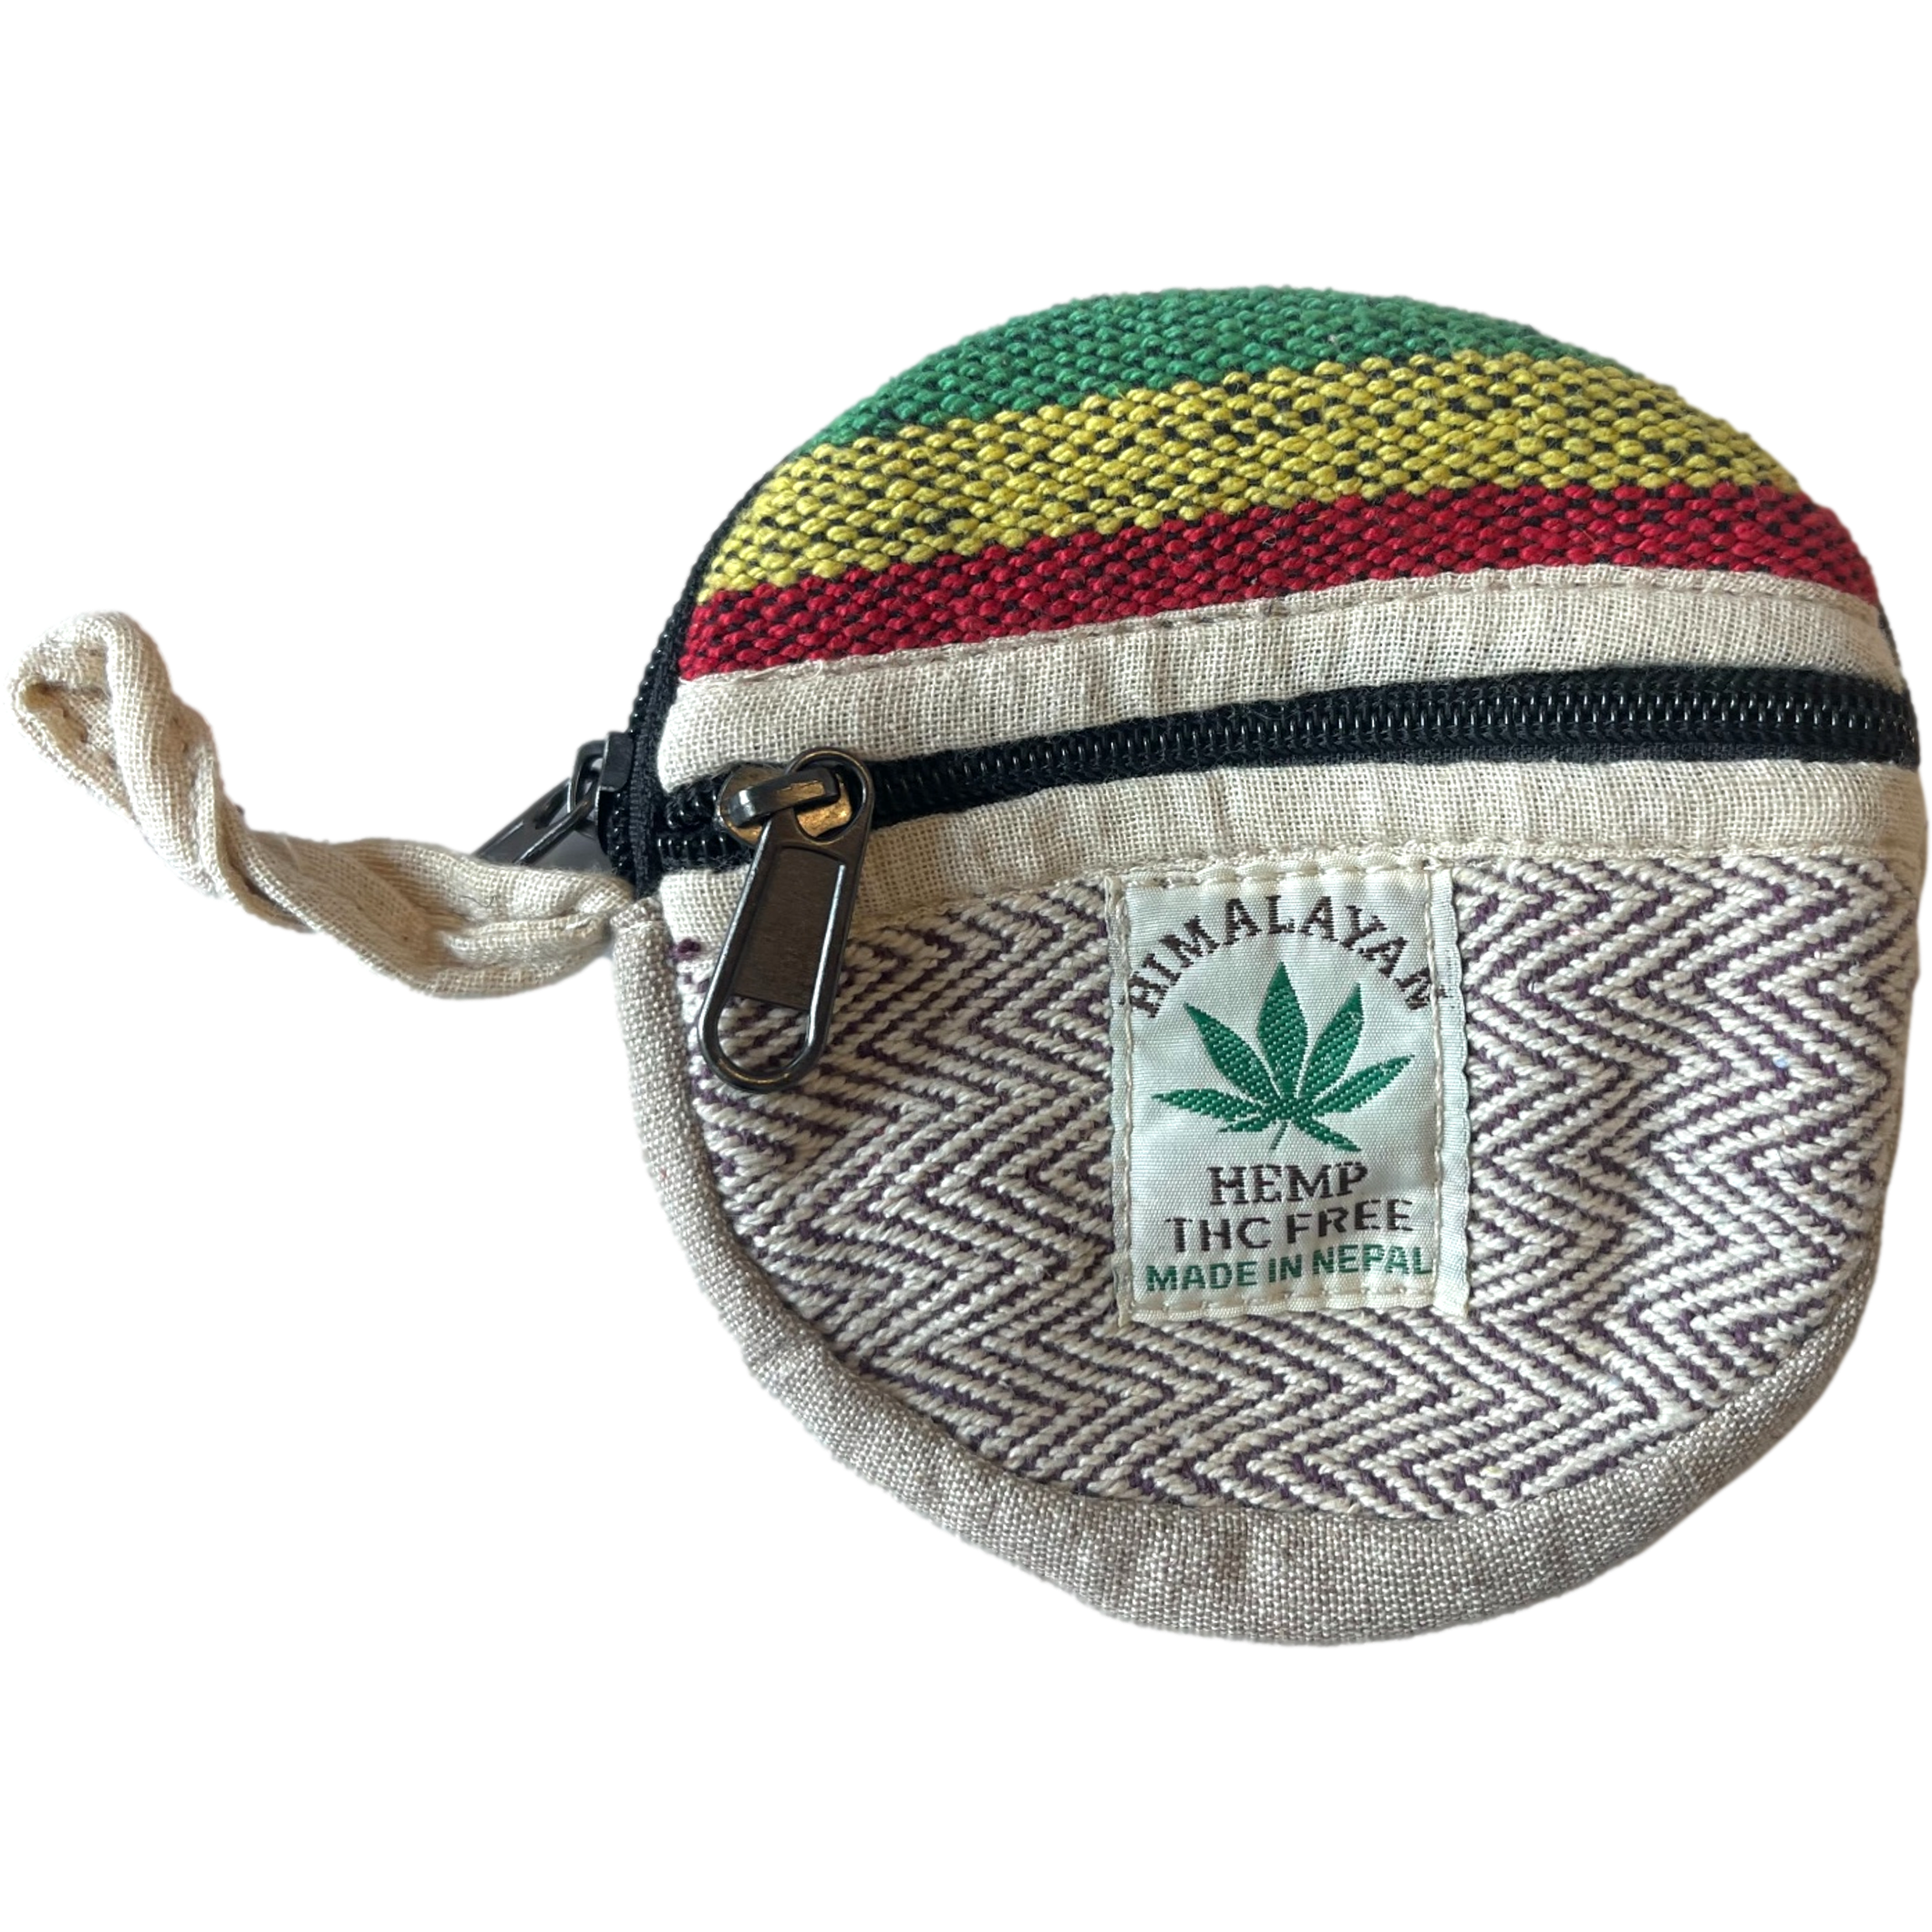 Buy COLOREDDREAMS Himalayan Hemp Round Coin Pouch | Eco-Friendly Pouch -  Blue at Amazon.in